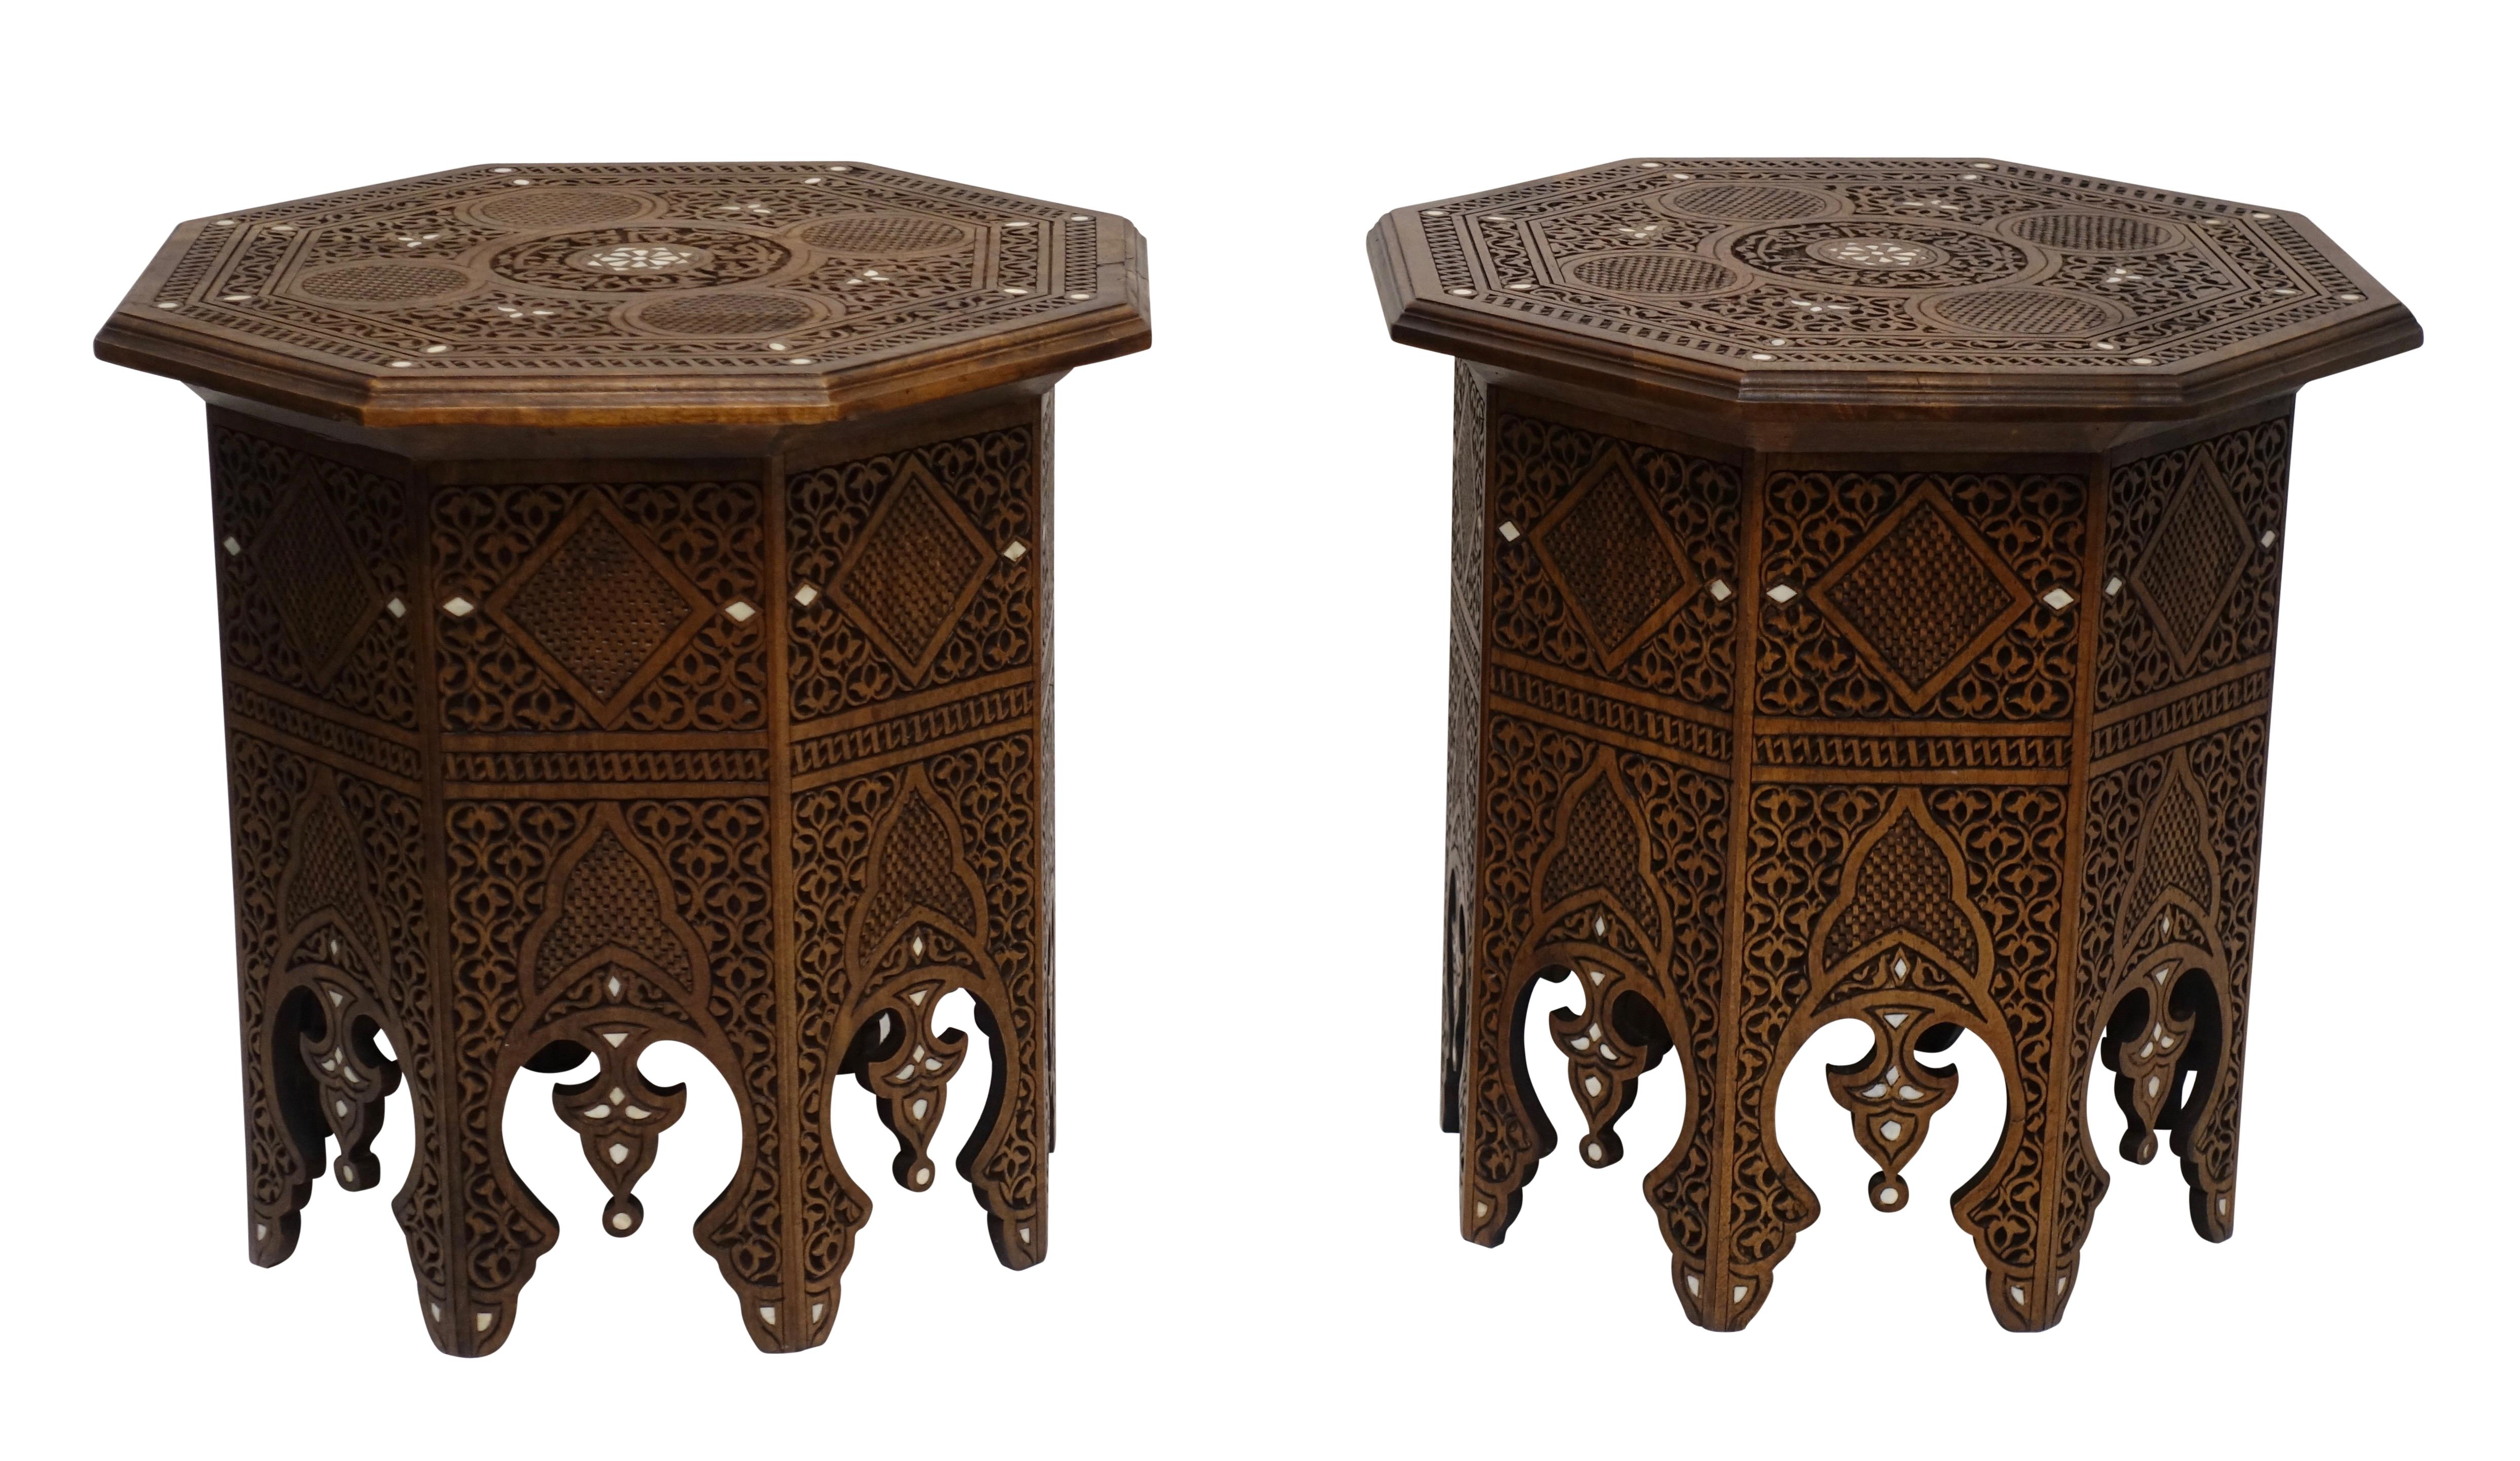 A pair of midcentury Moorish style highly carved tabouret tables with bone inlay detail.
Last half of 20th century.